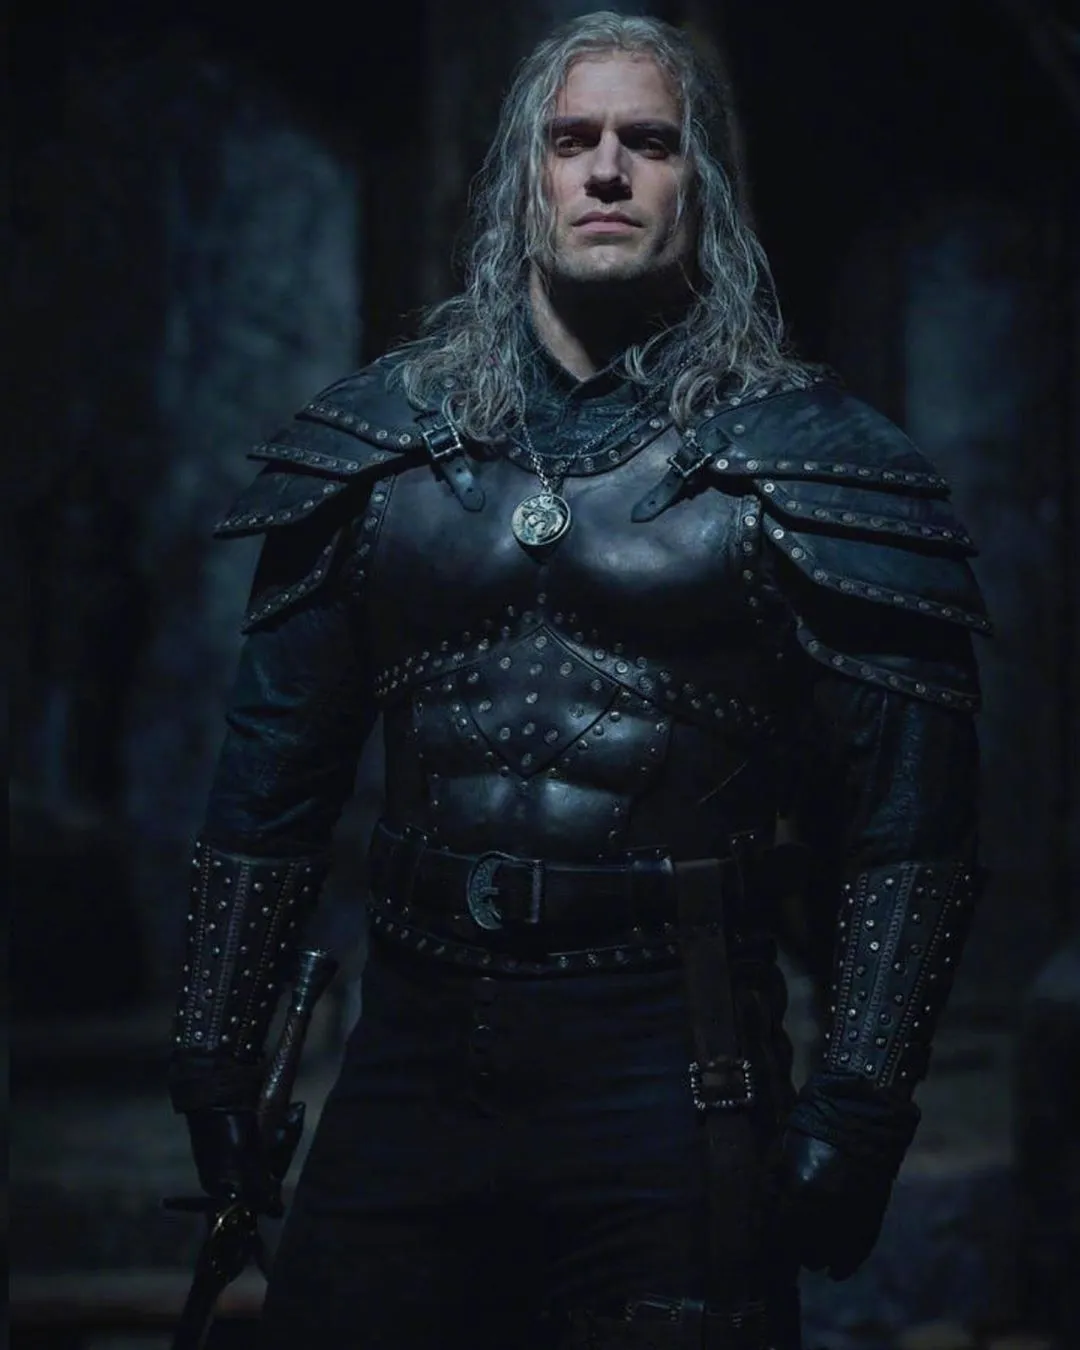 'The Witcher Season 4' announces big change: Geralt will be played by Liam Hemsworth | FMV6